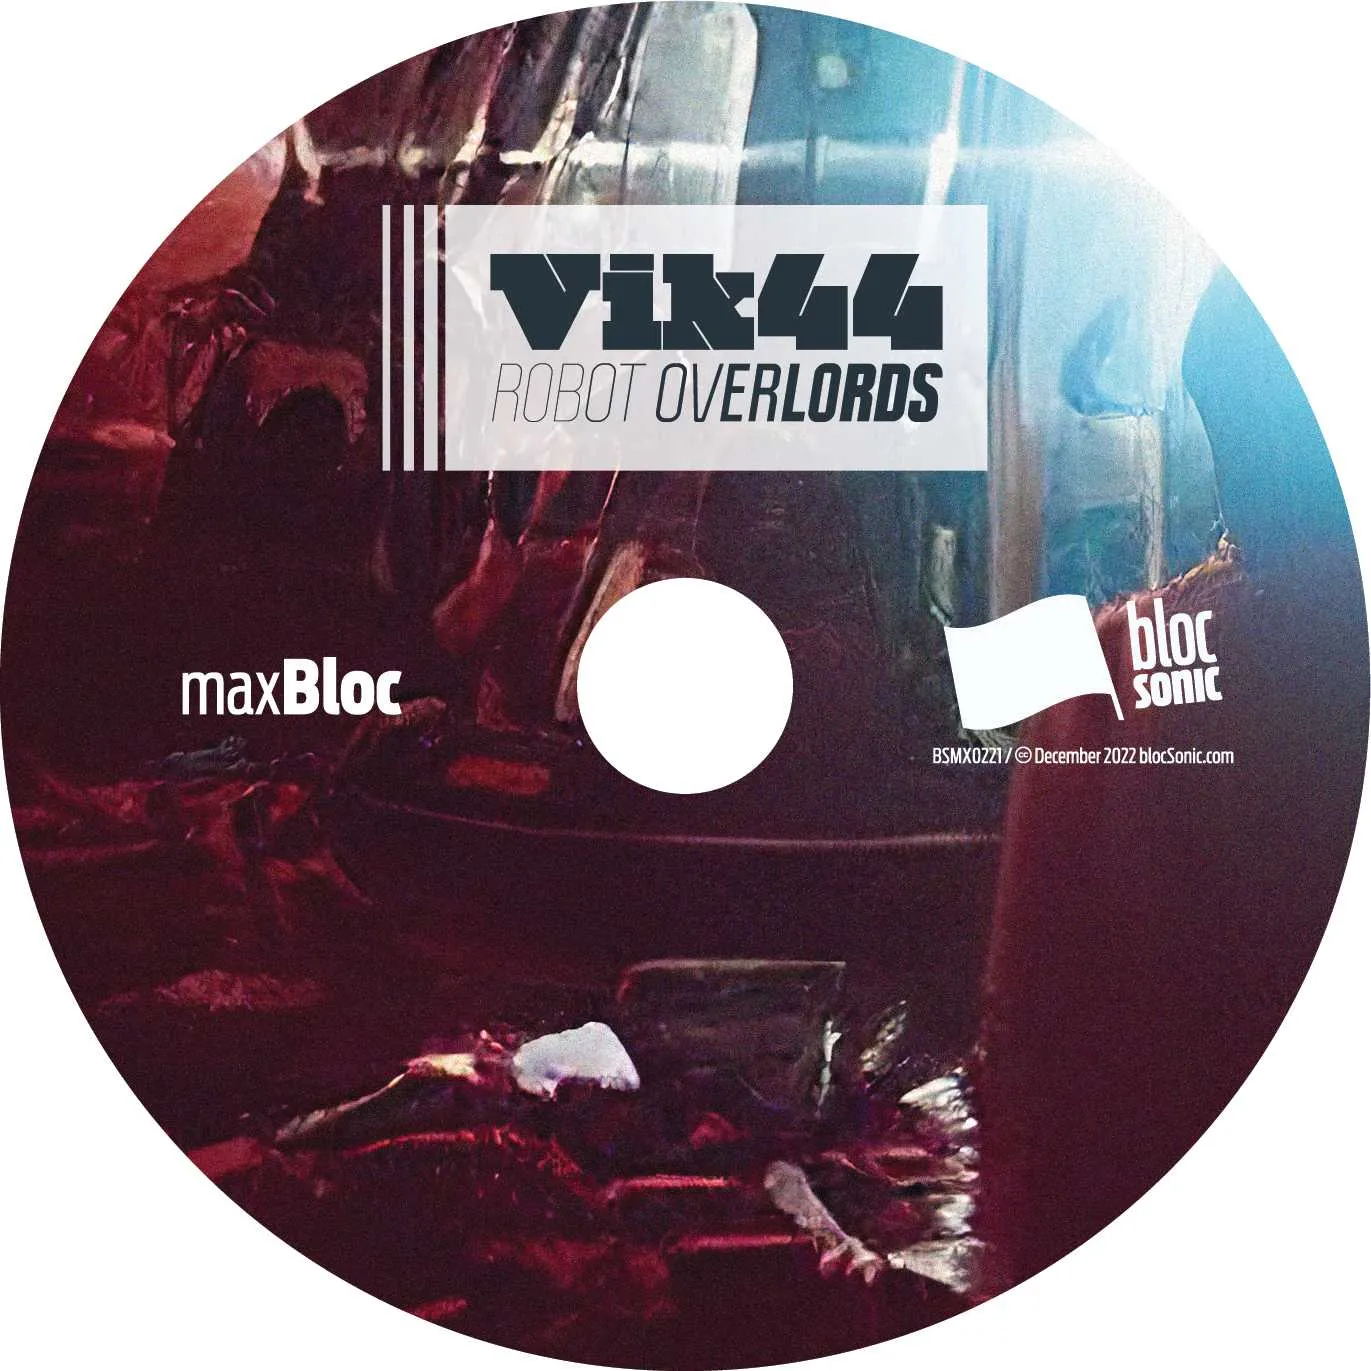 Album disc for “Robot Overlords” by Vik44